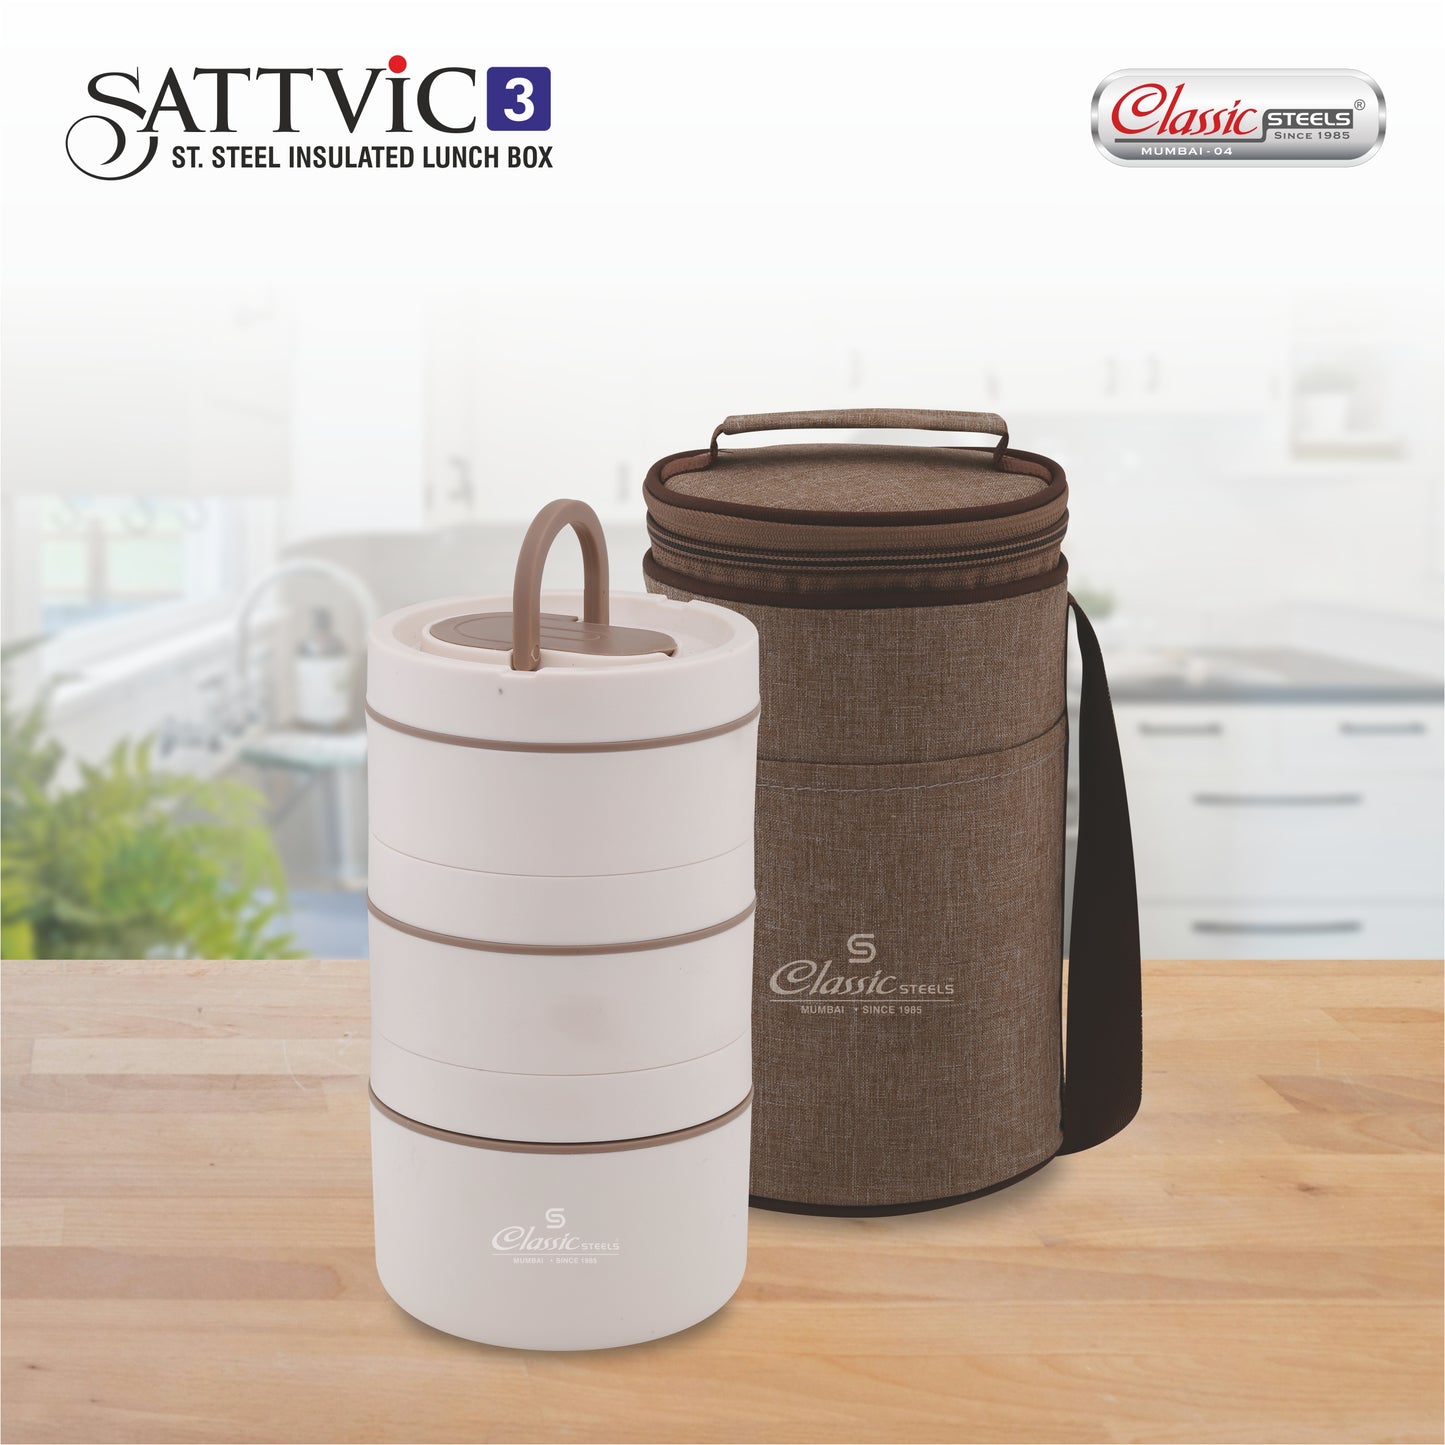 Sattvic 3 pcs Insulated Lunch Box